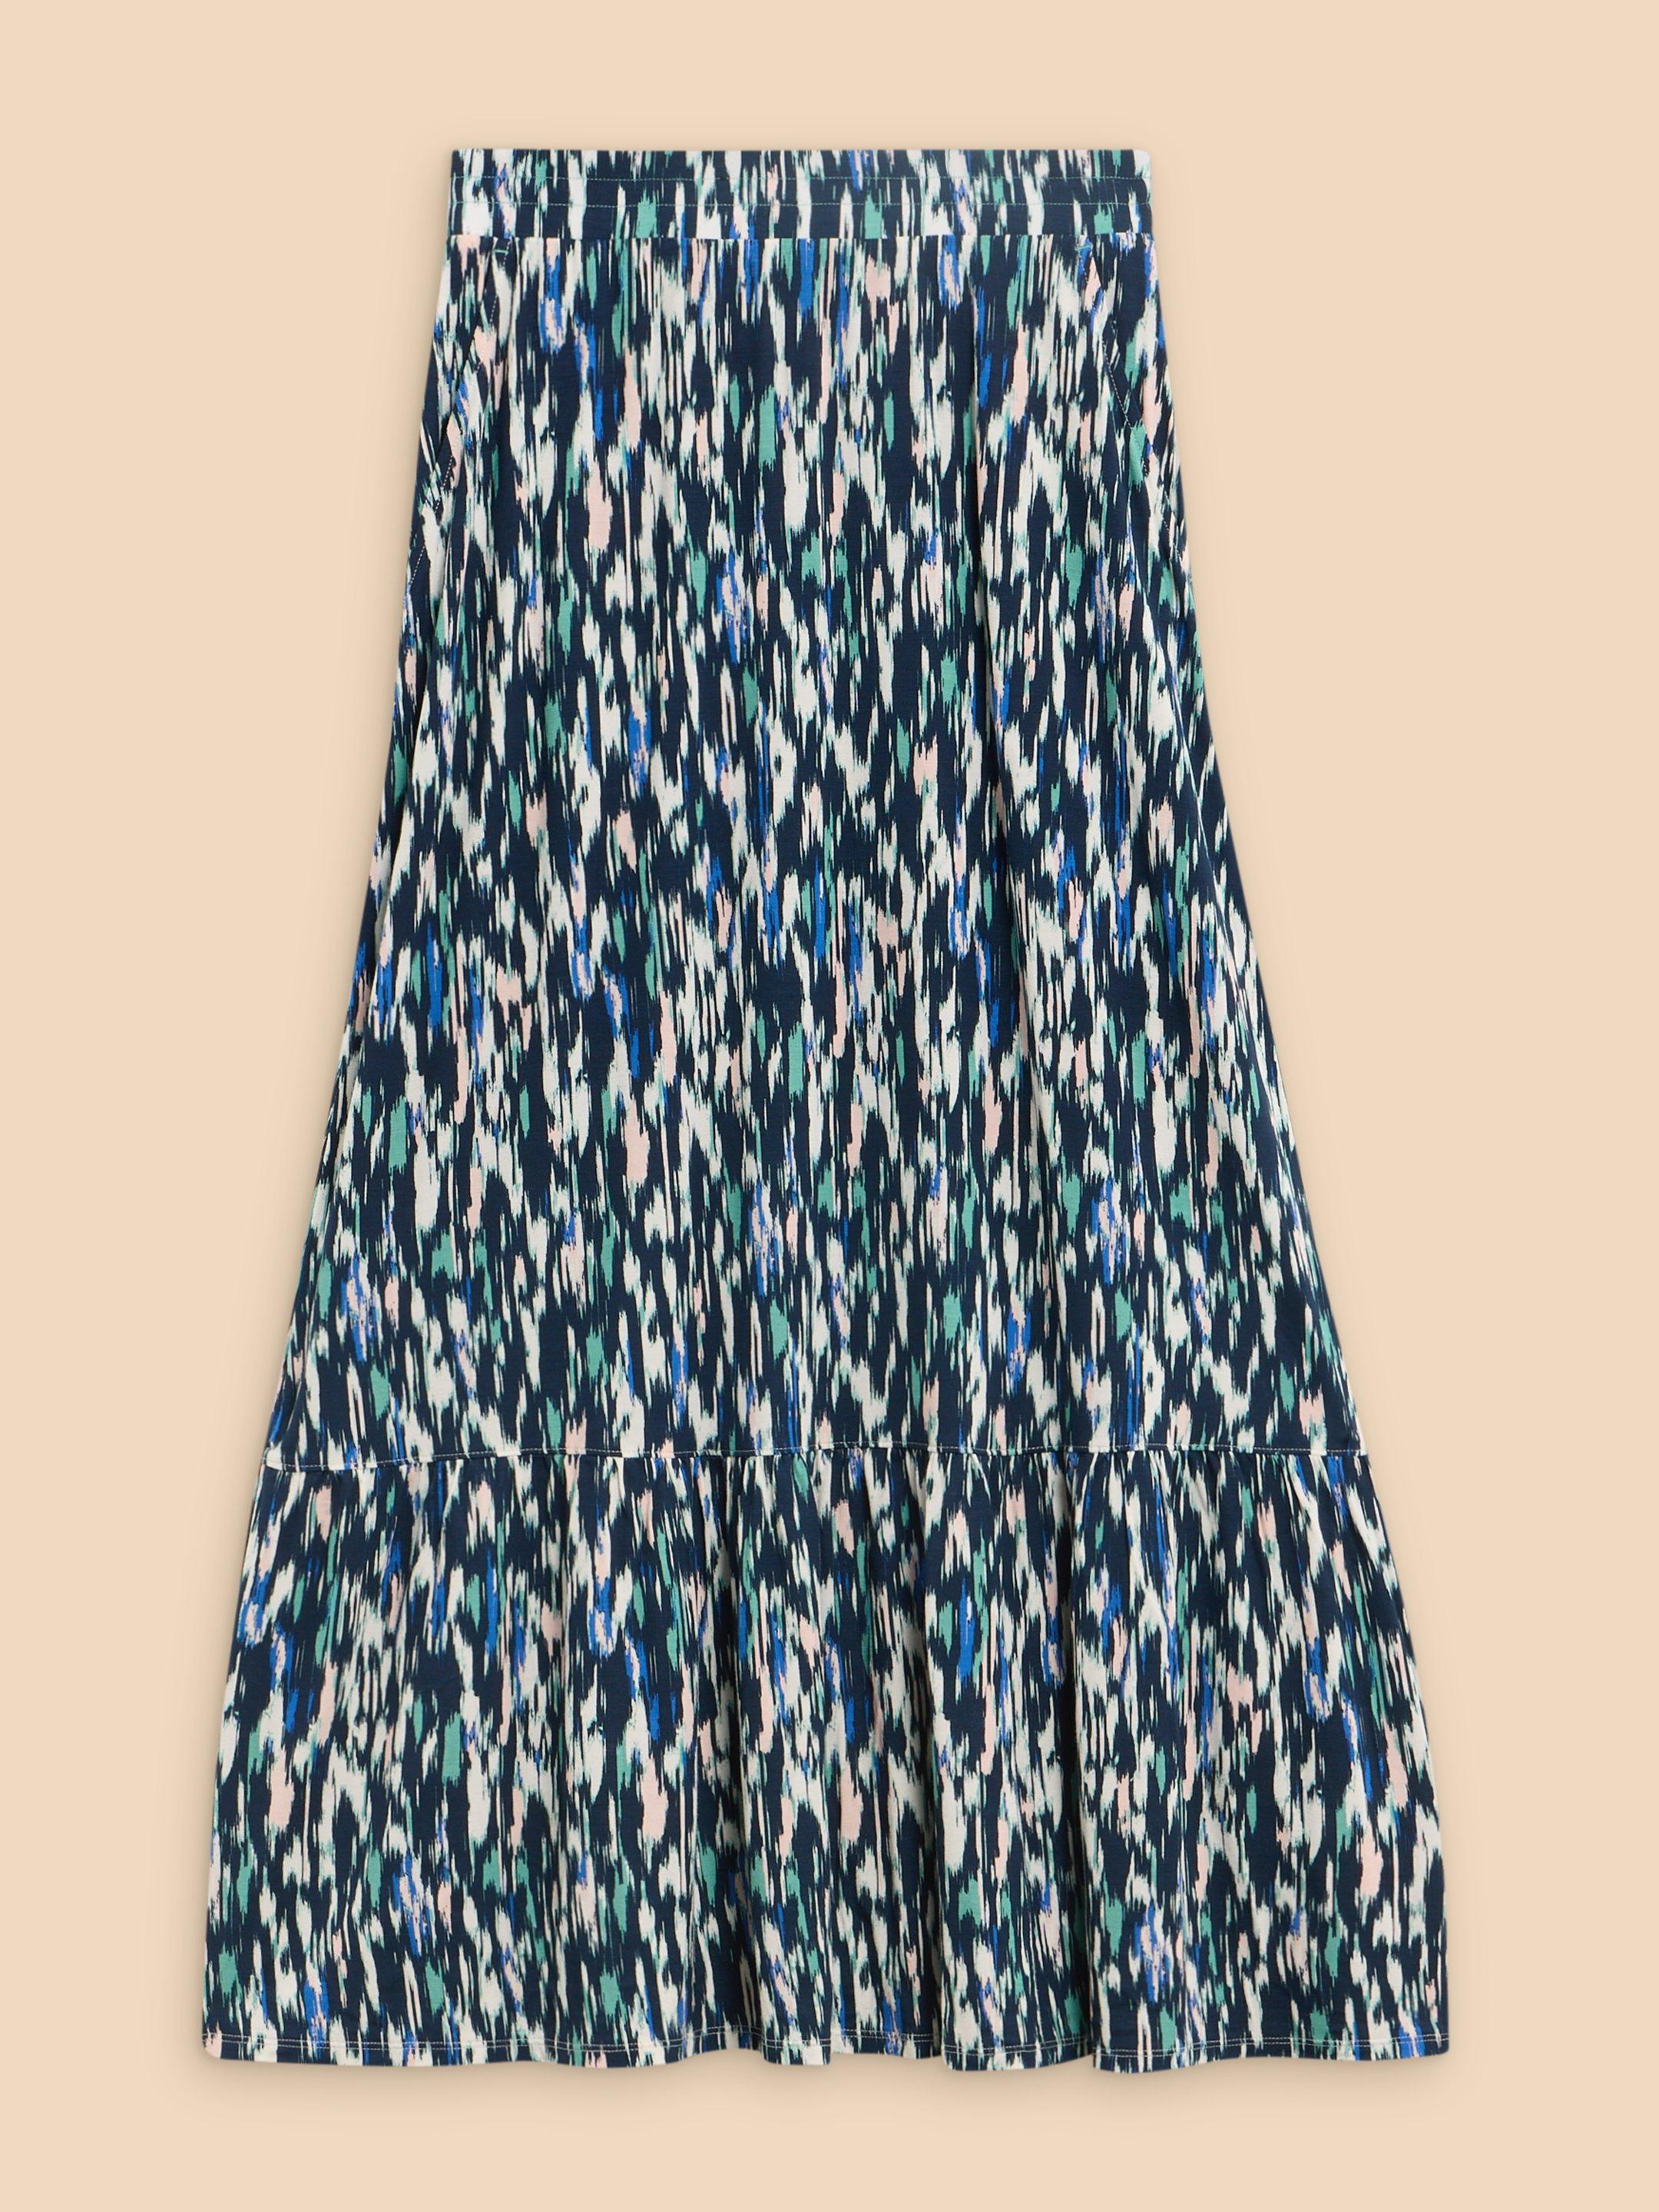 Charley Eco Vero Maxi Skirt in NAVY PR - FLAT FRONT